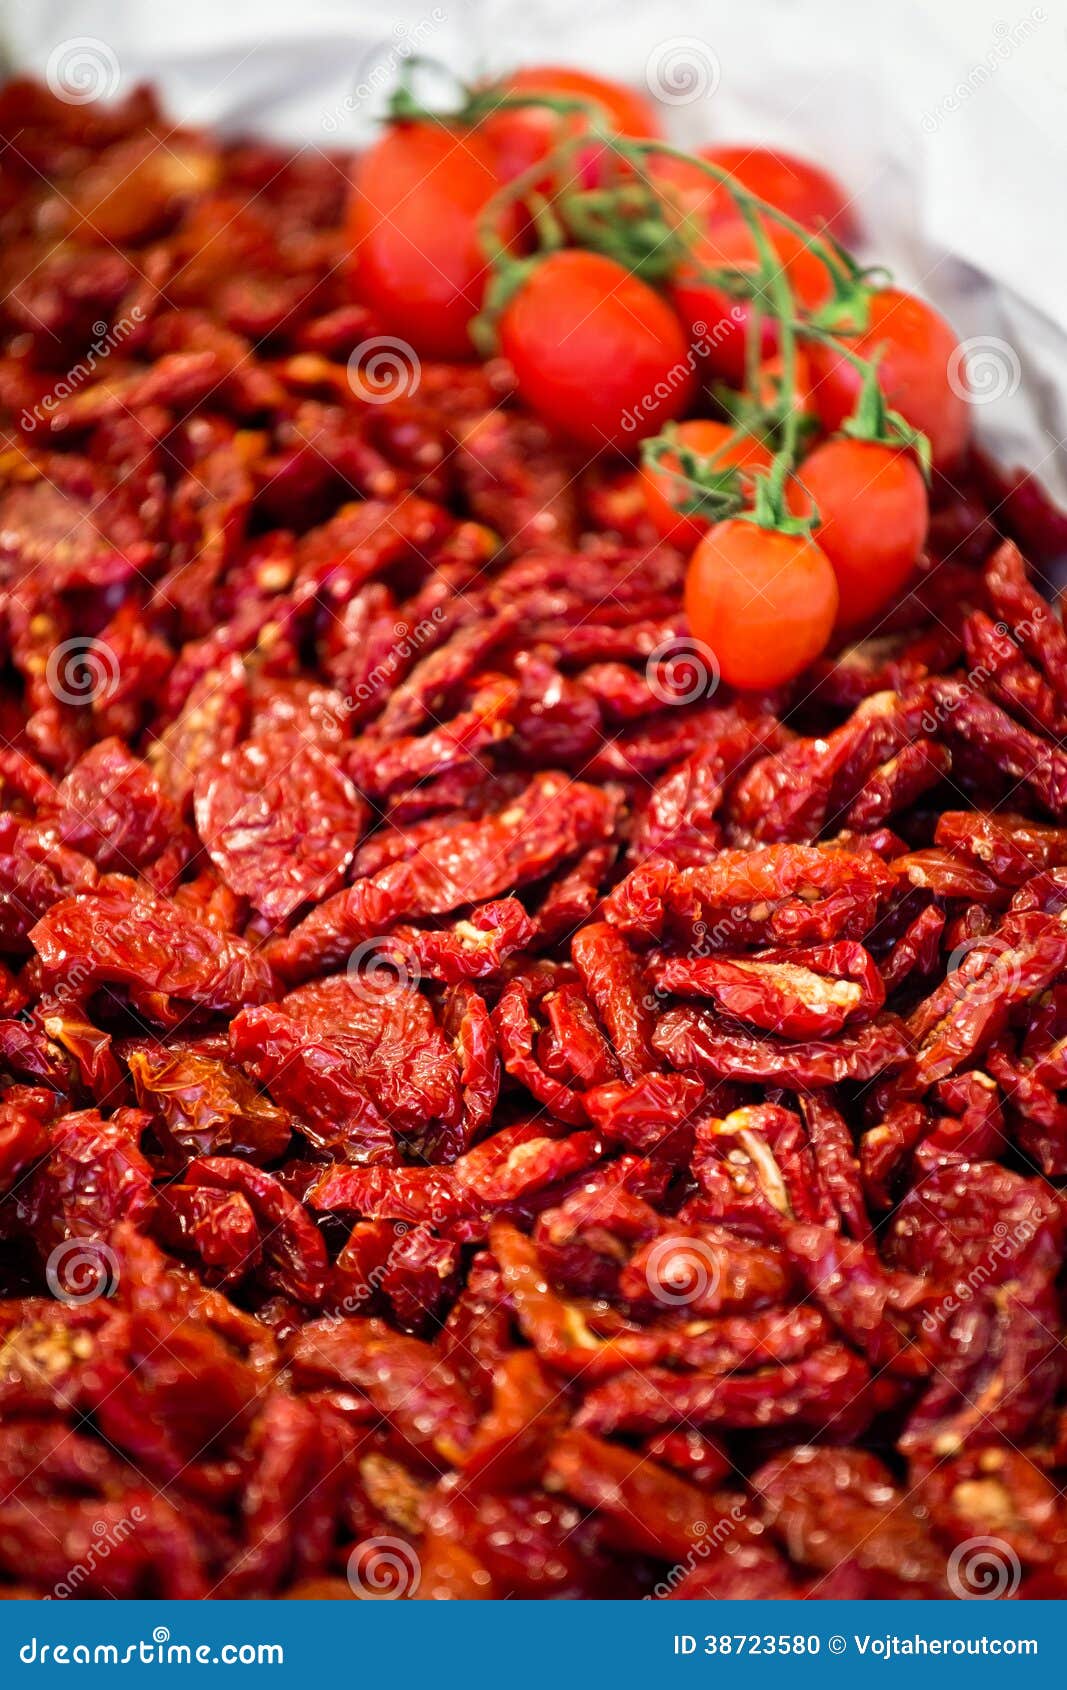 heap of sundried tomatoes with fresh tomatoes